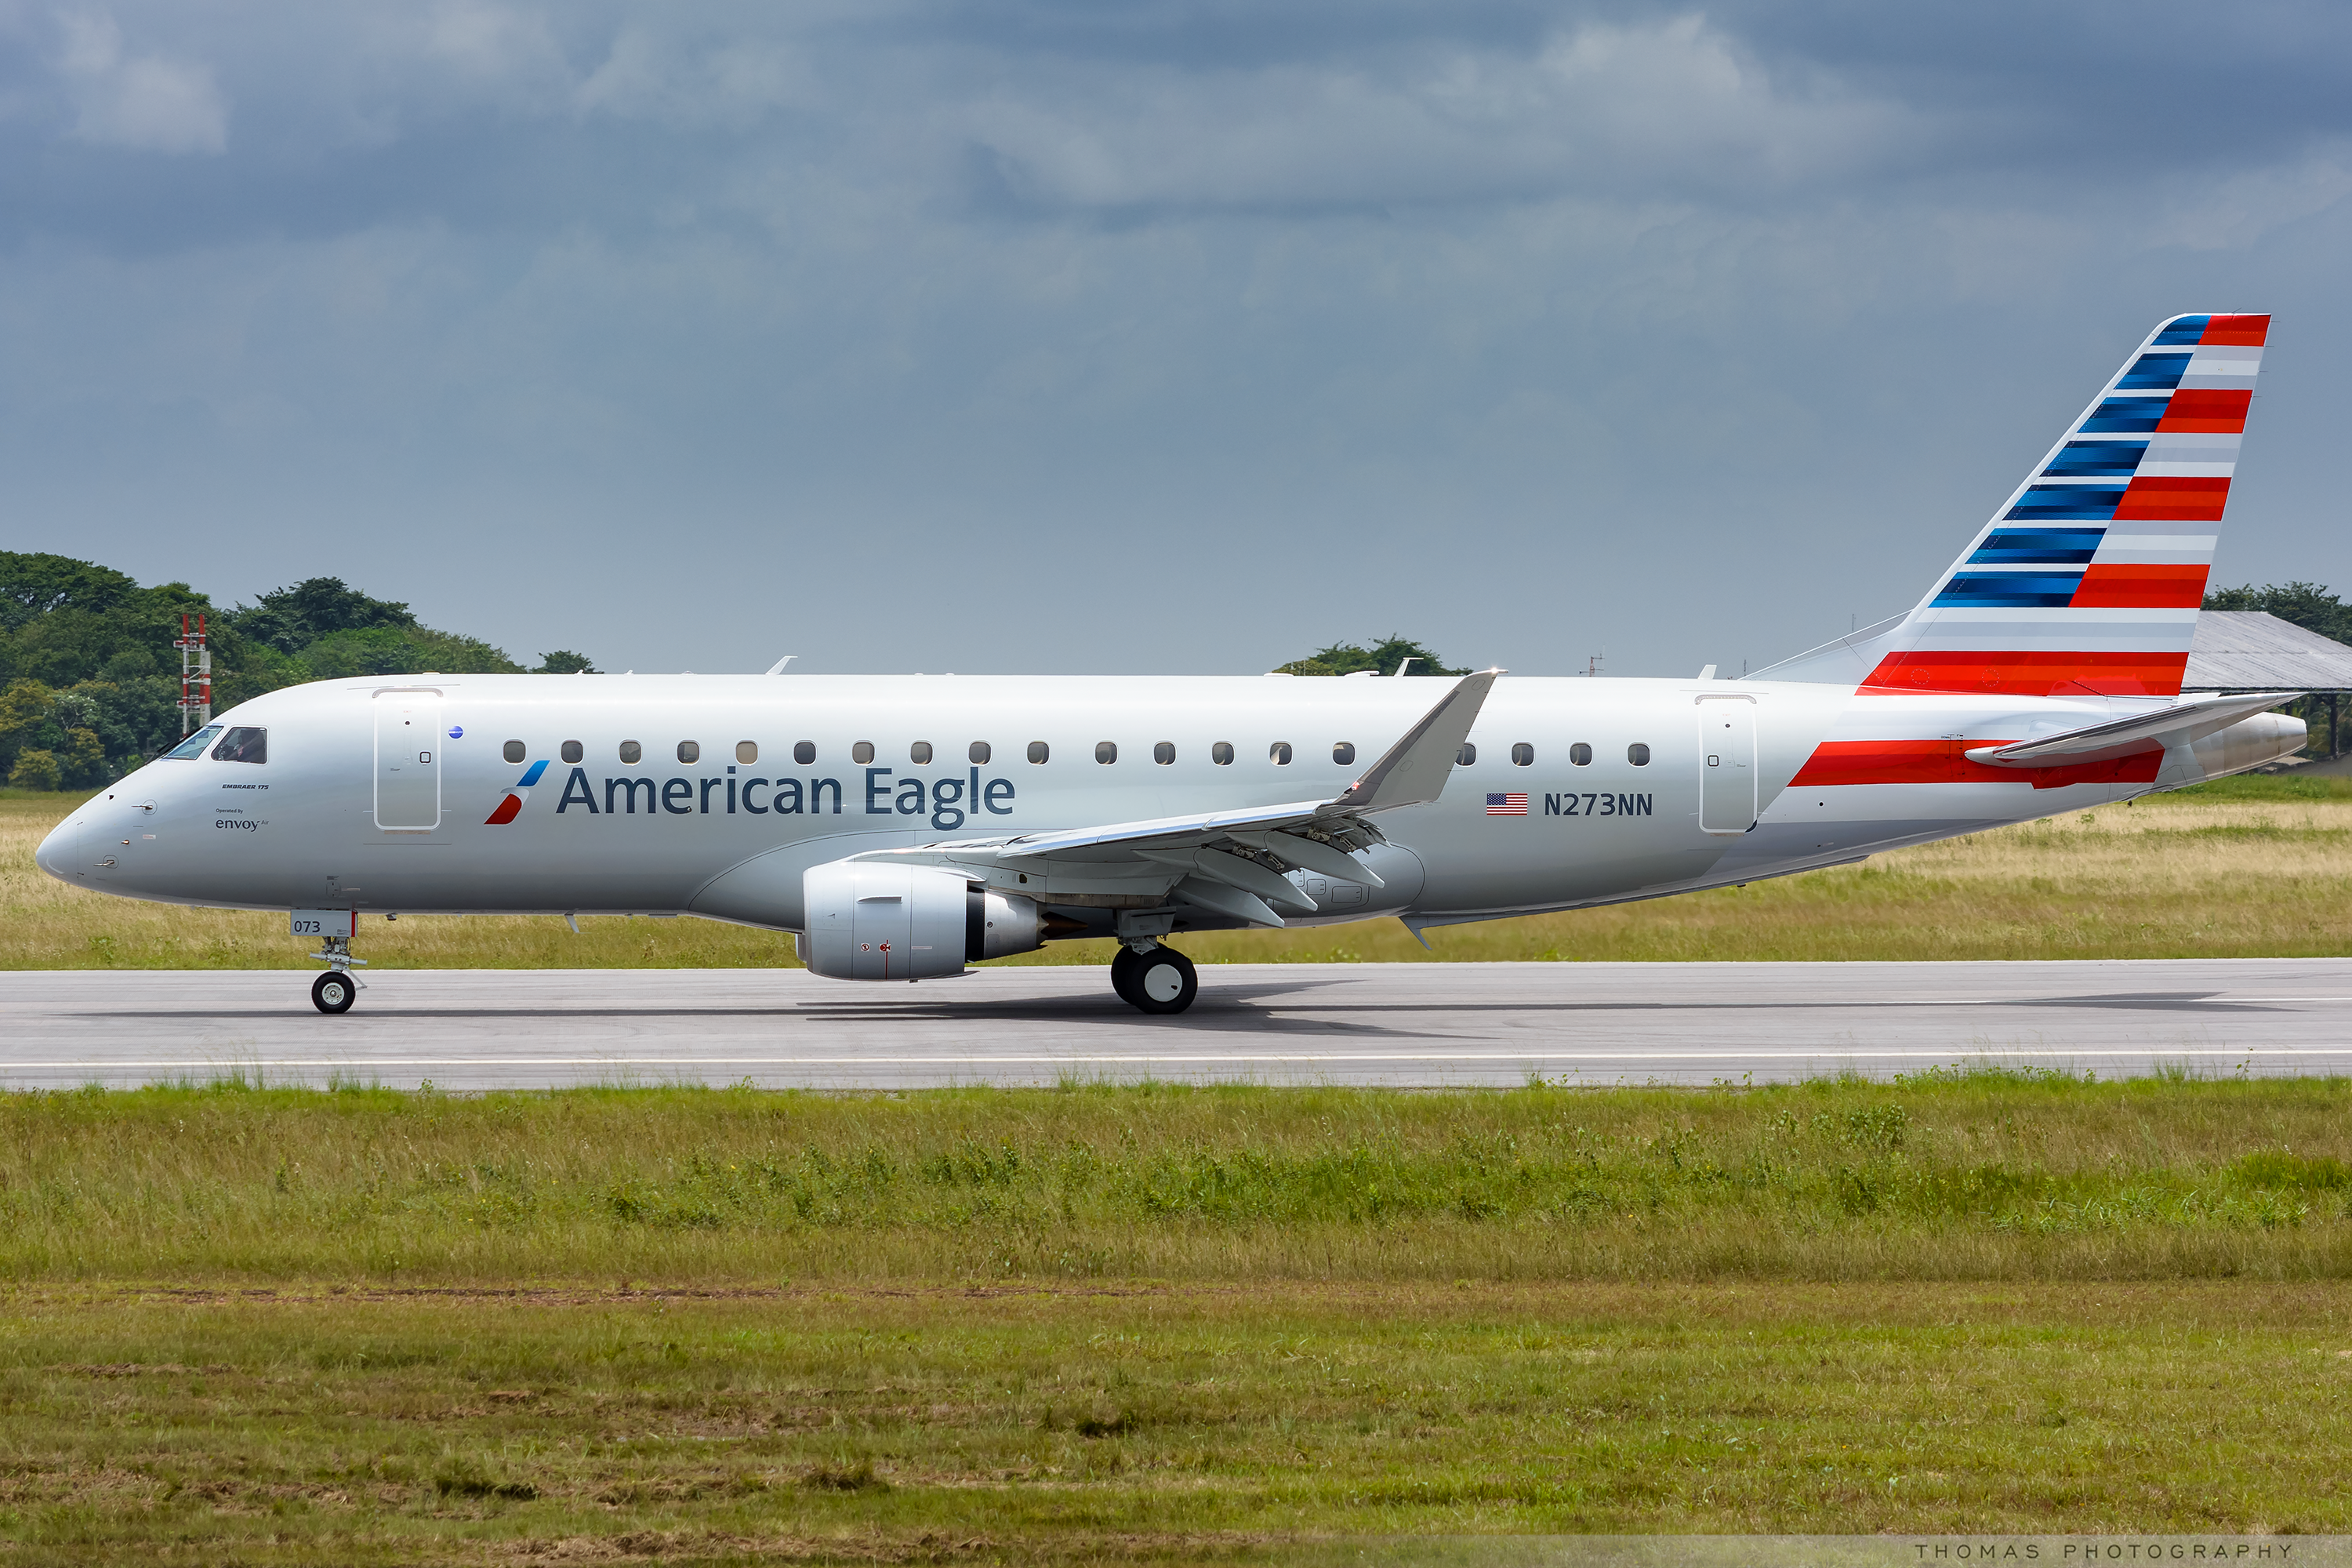 American Airlines Embraer E175 operated by Envoy Air as American Eagle